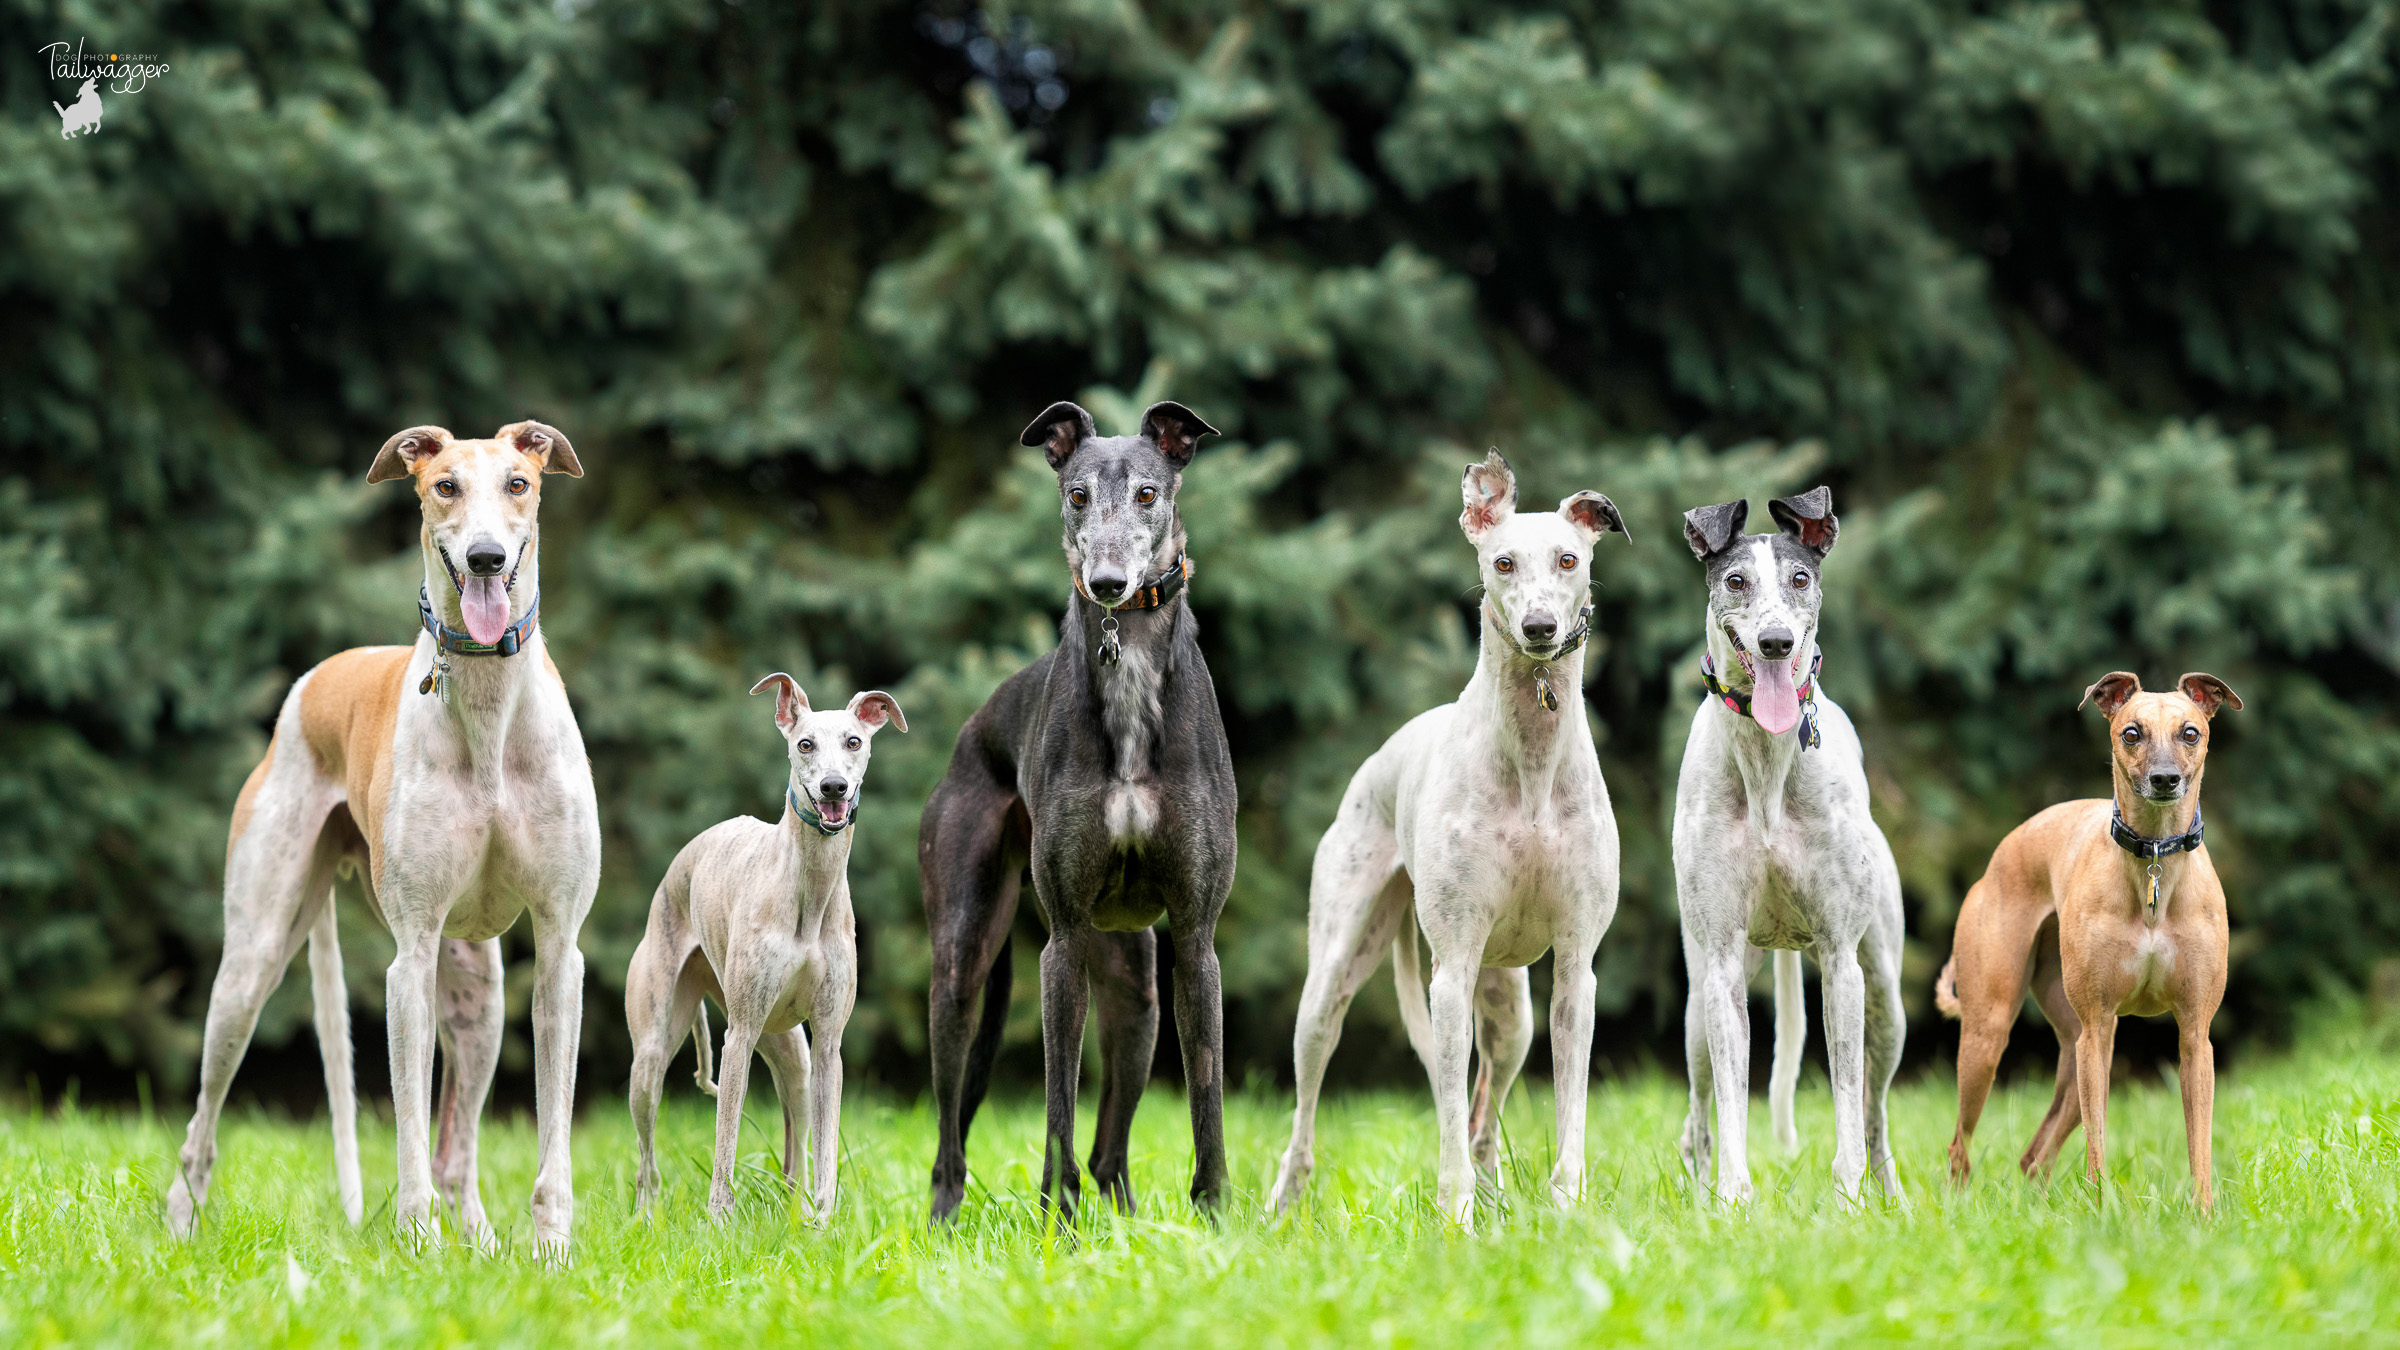 Six Greyhounds and Whippets stand side by side in their backyard in Grand Rapids, MI.